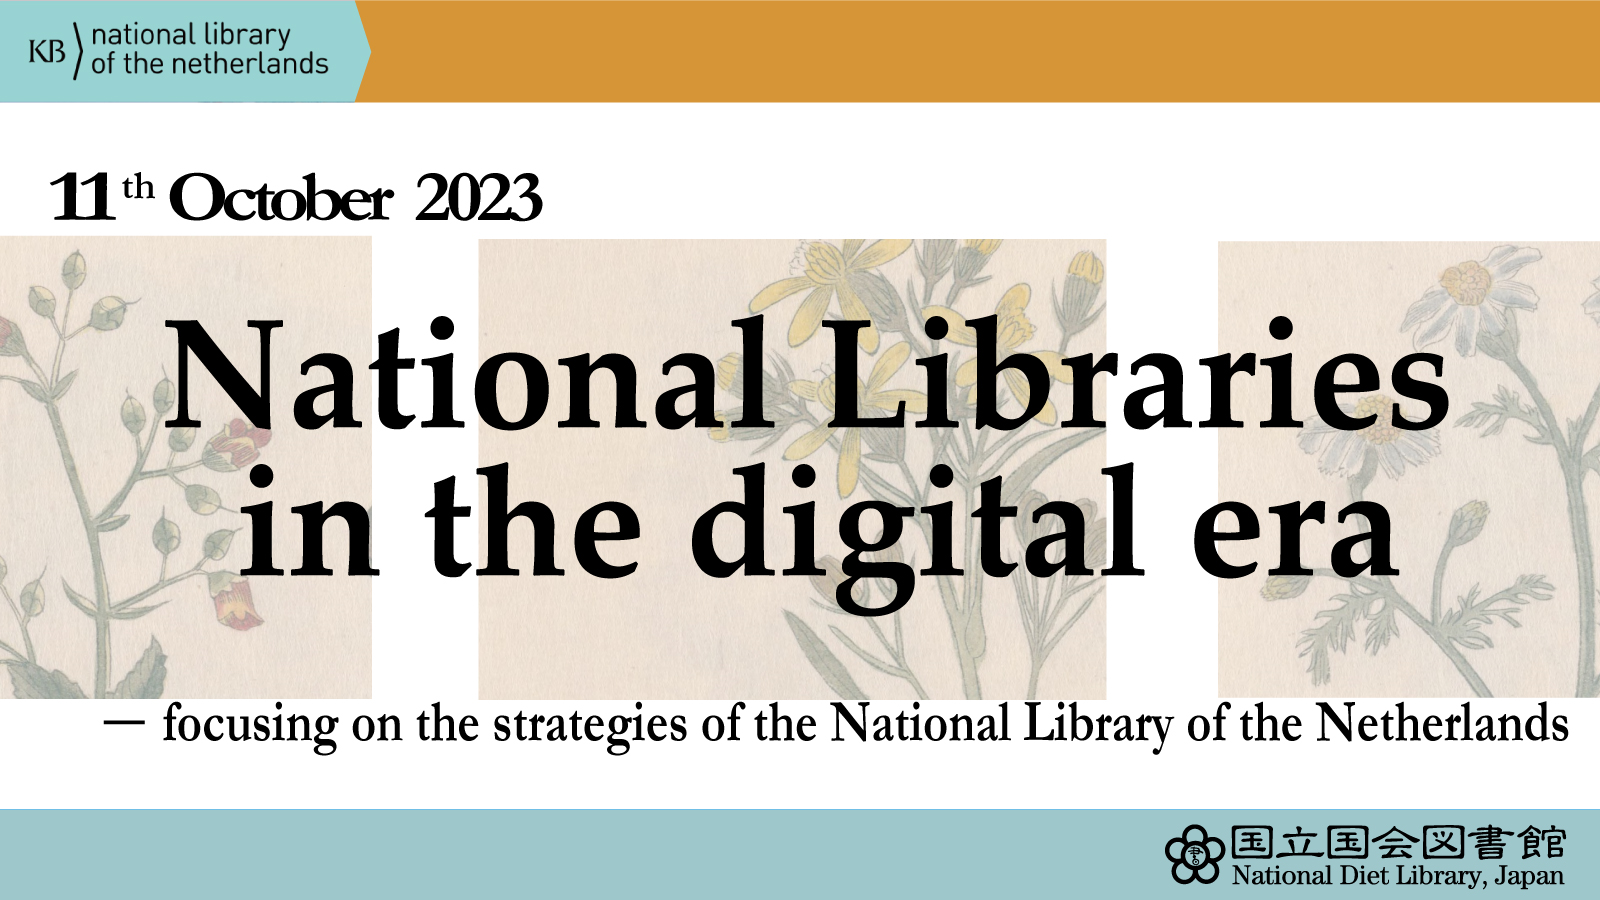 Lecture “National Libraries in the digital era” 